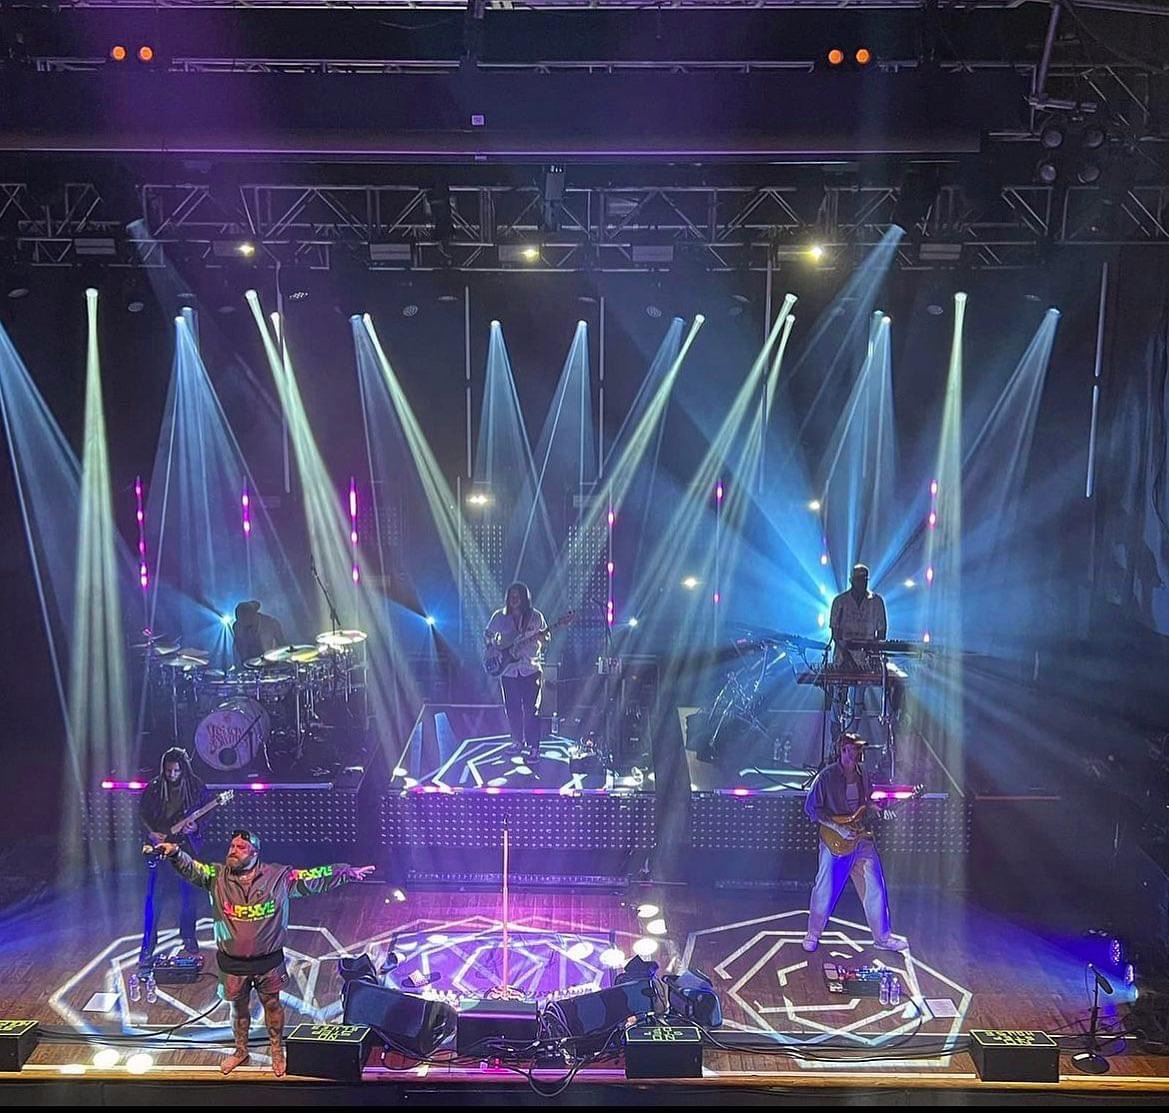 Band on stage staging in the spotlight with dynamic lighting surrounding them.